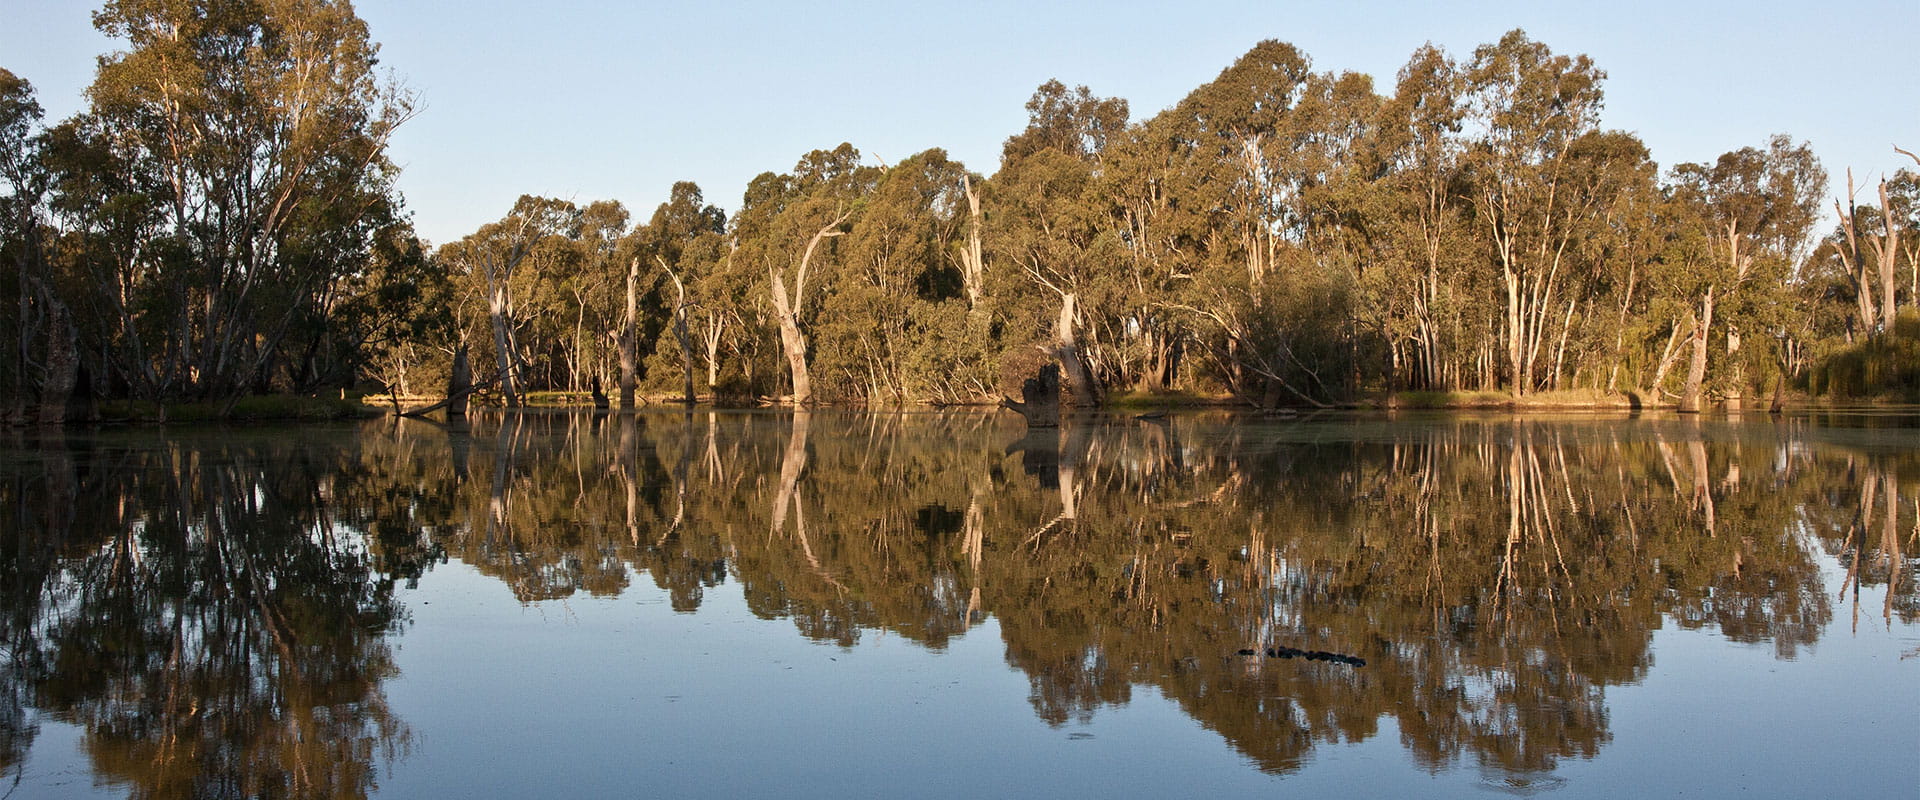 The reflection of the sky in the Ovens River wetlands in the Warby-Ovens National Park.